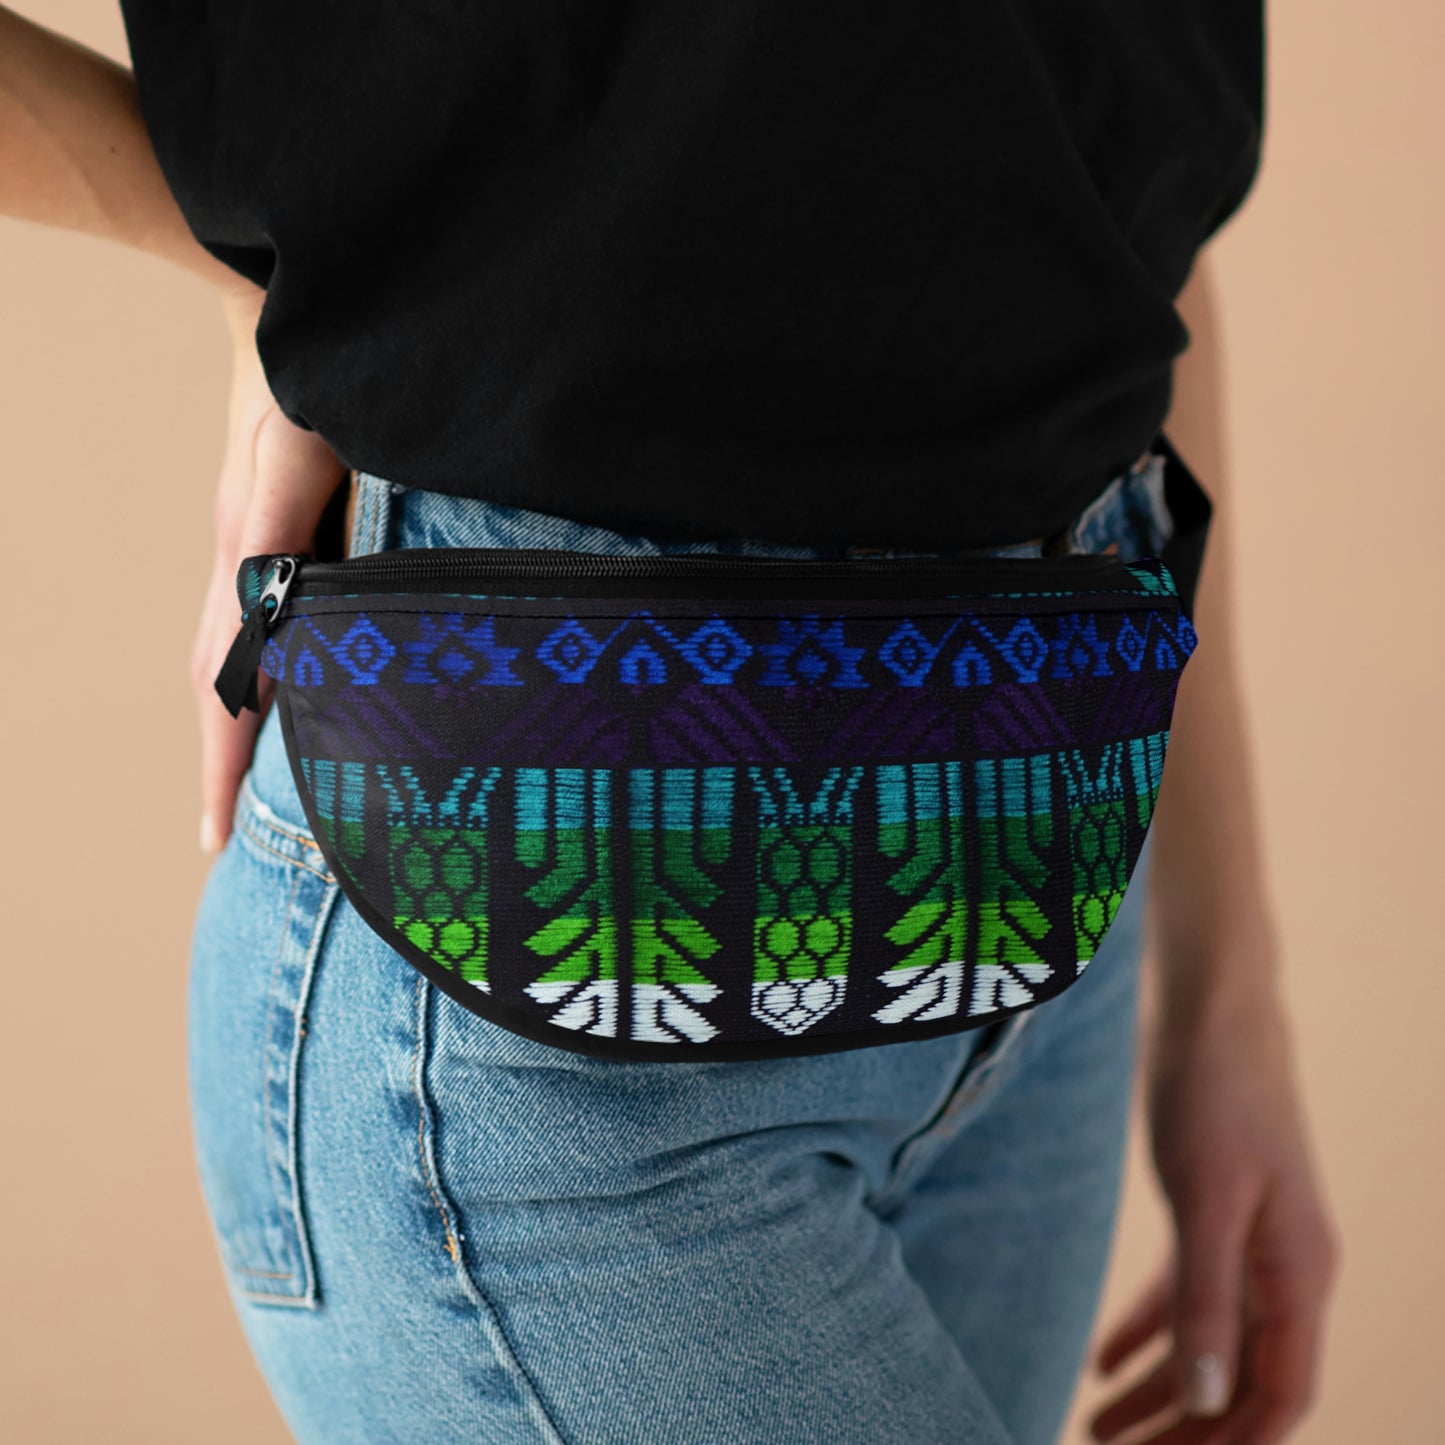 A Pack of Lies! Fanny Pack